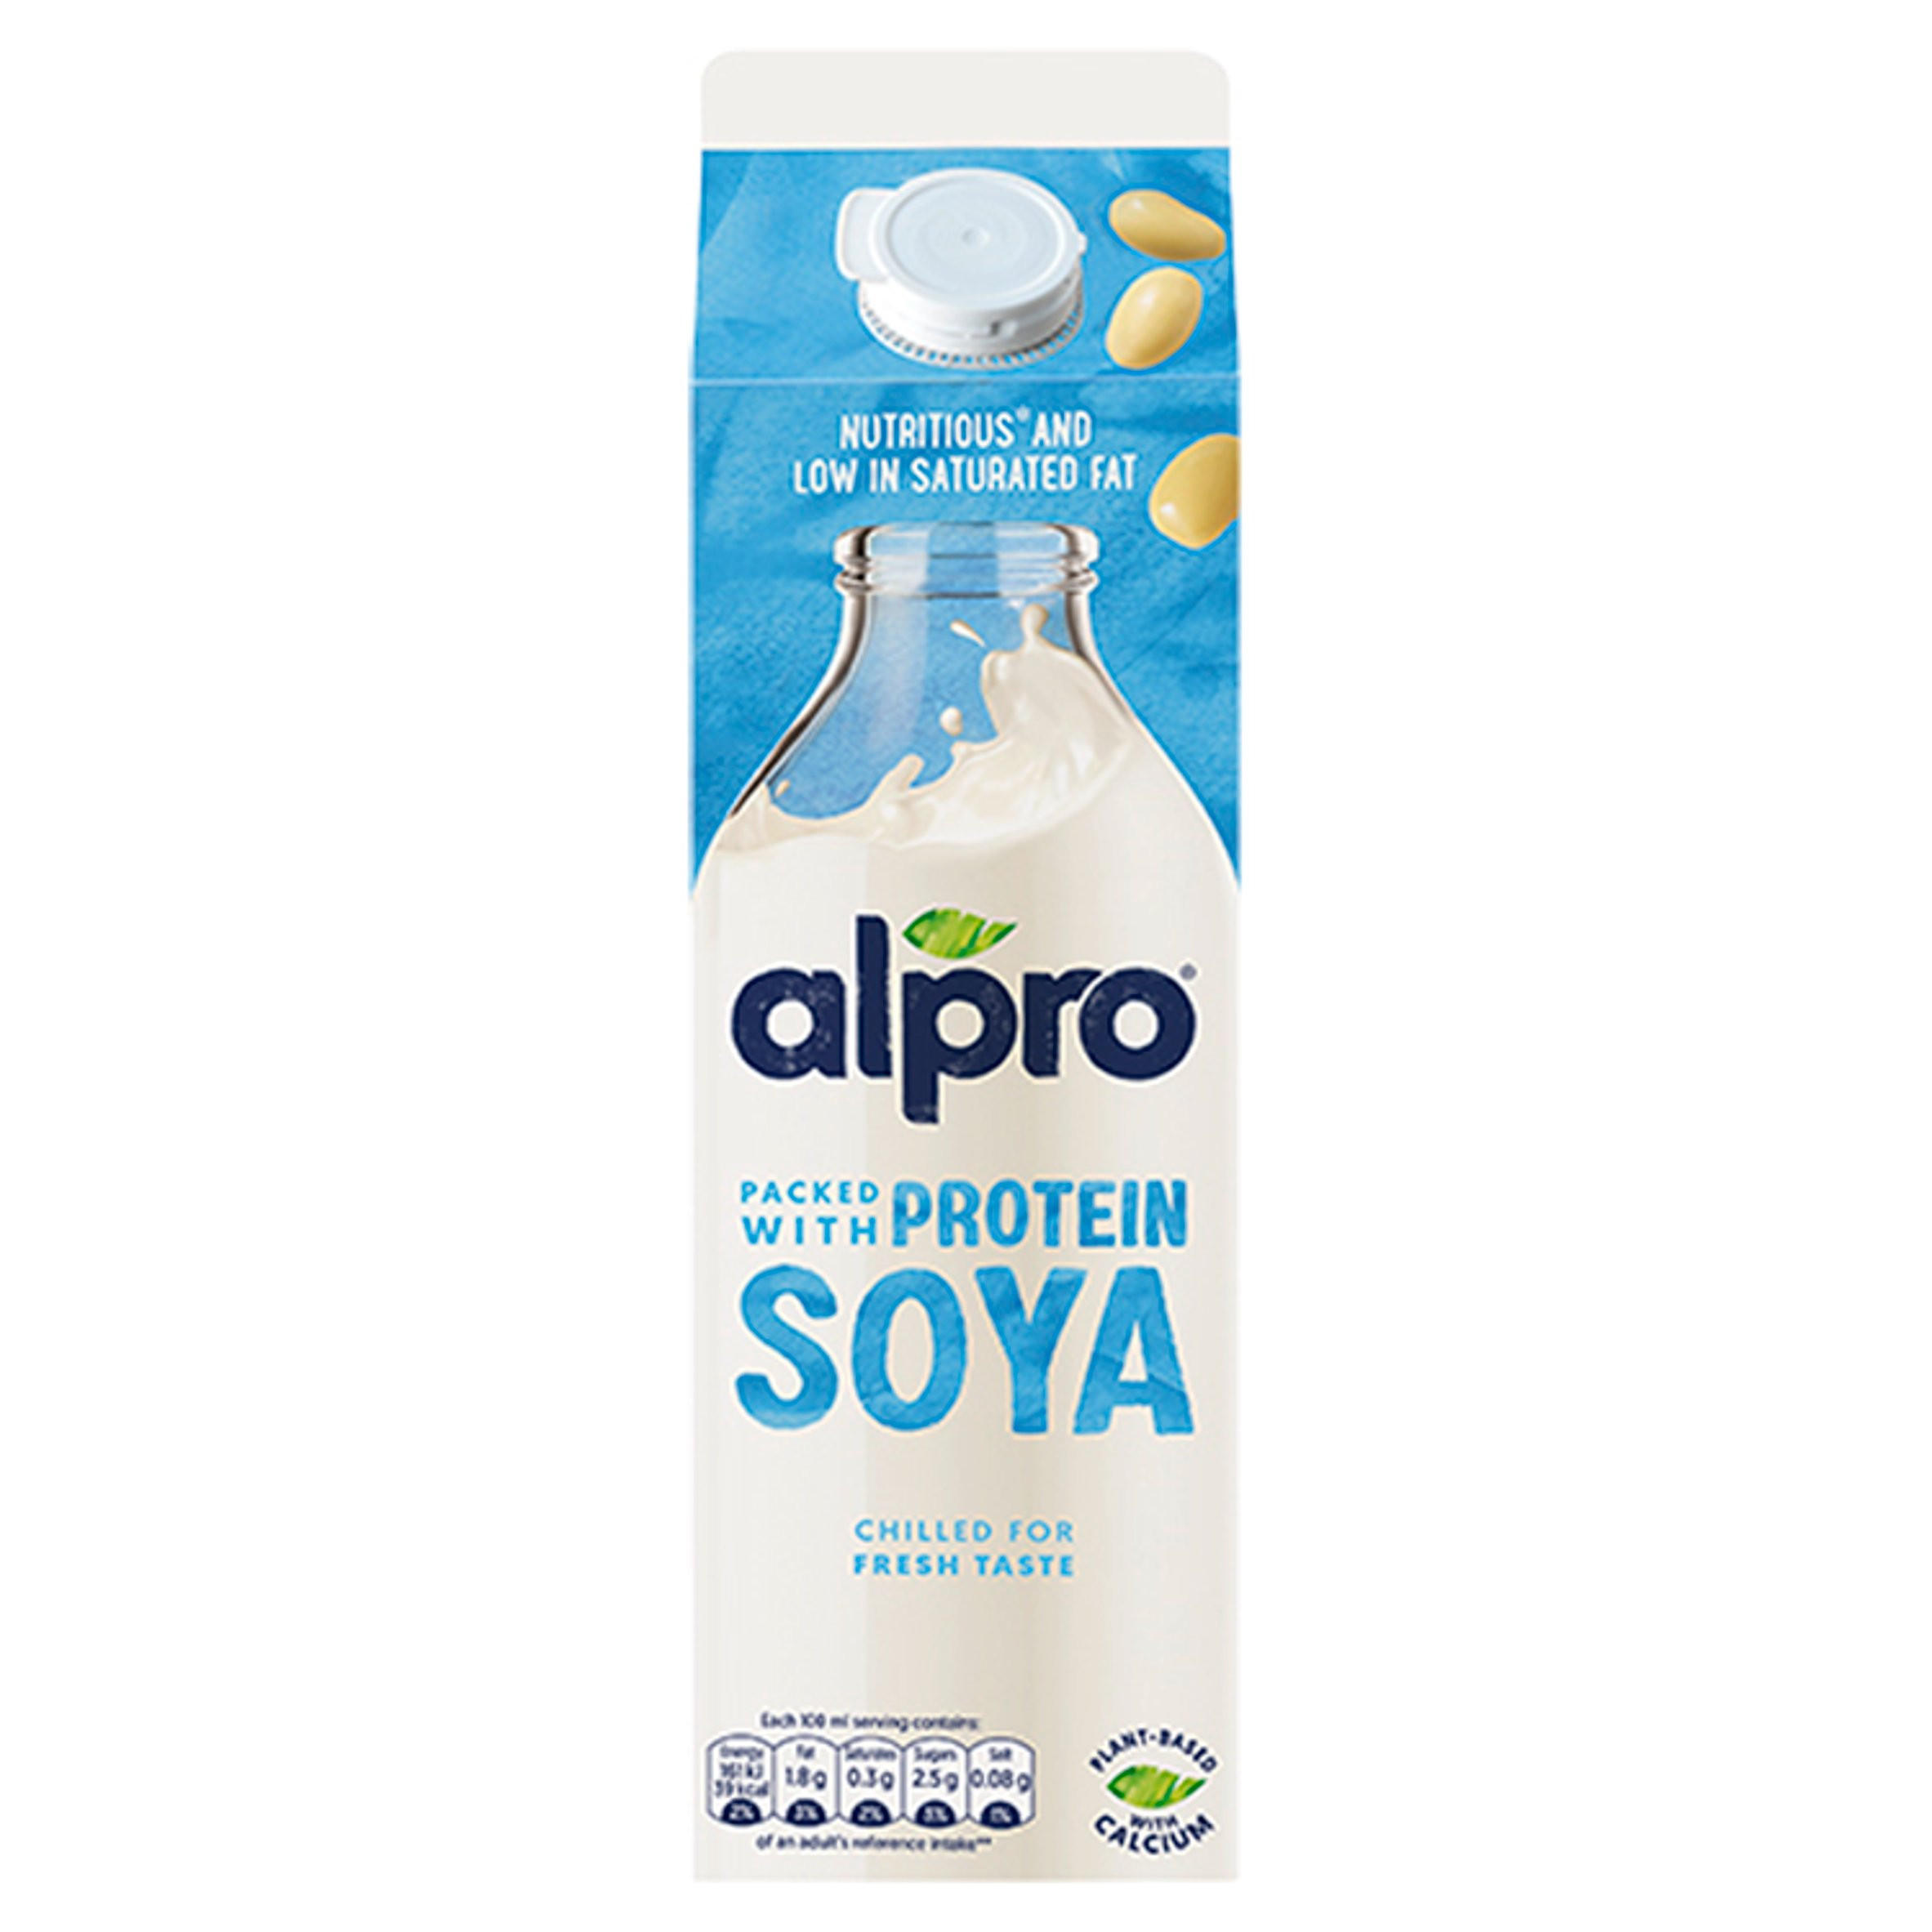 Alpro Packed with Protein Soya 1L, Milk